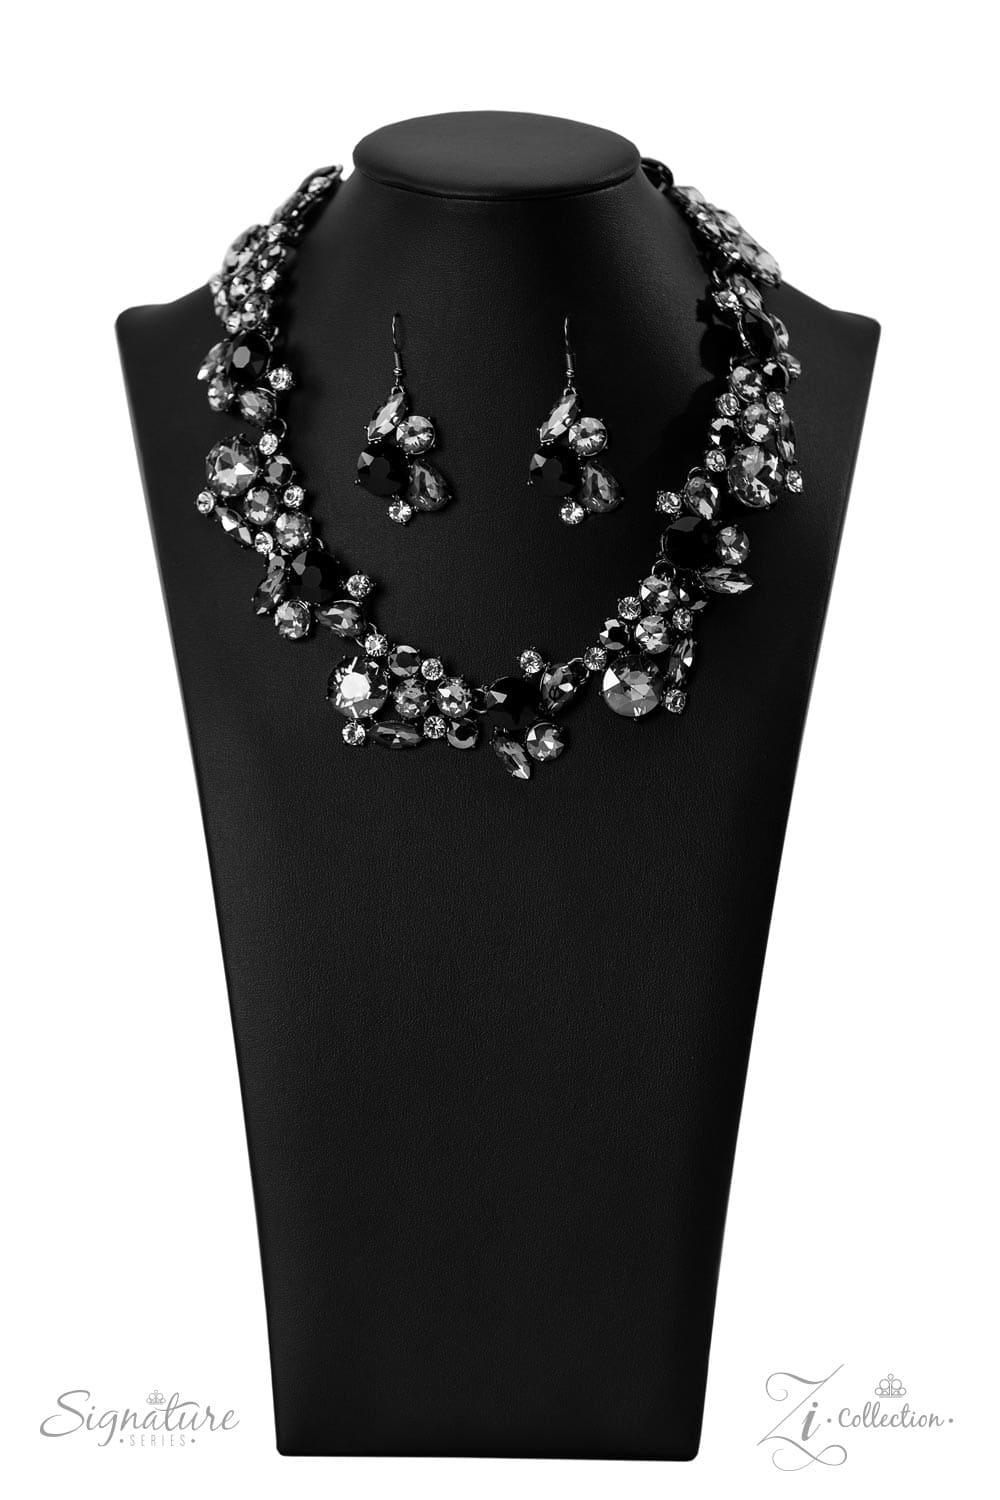 Paparazzi Accessories - The Kim - 2022 Signature Zi Collection Necklace - Bling by JessieK